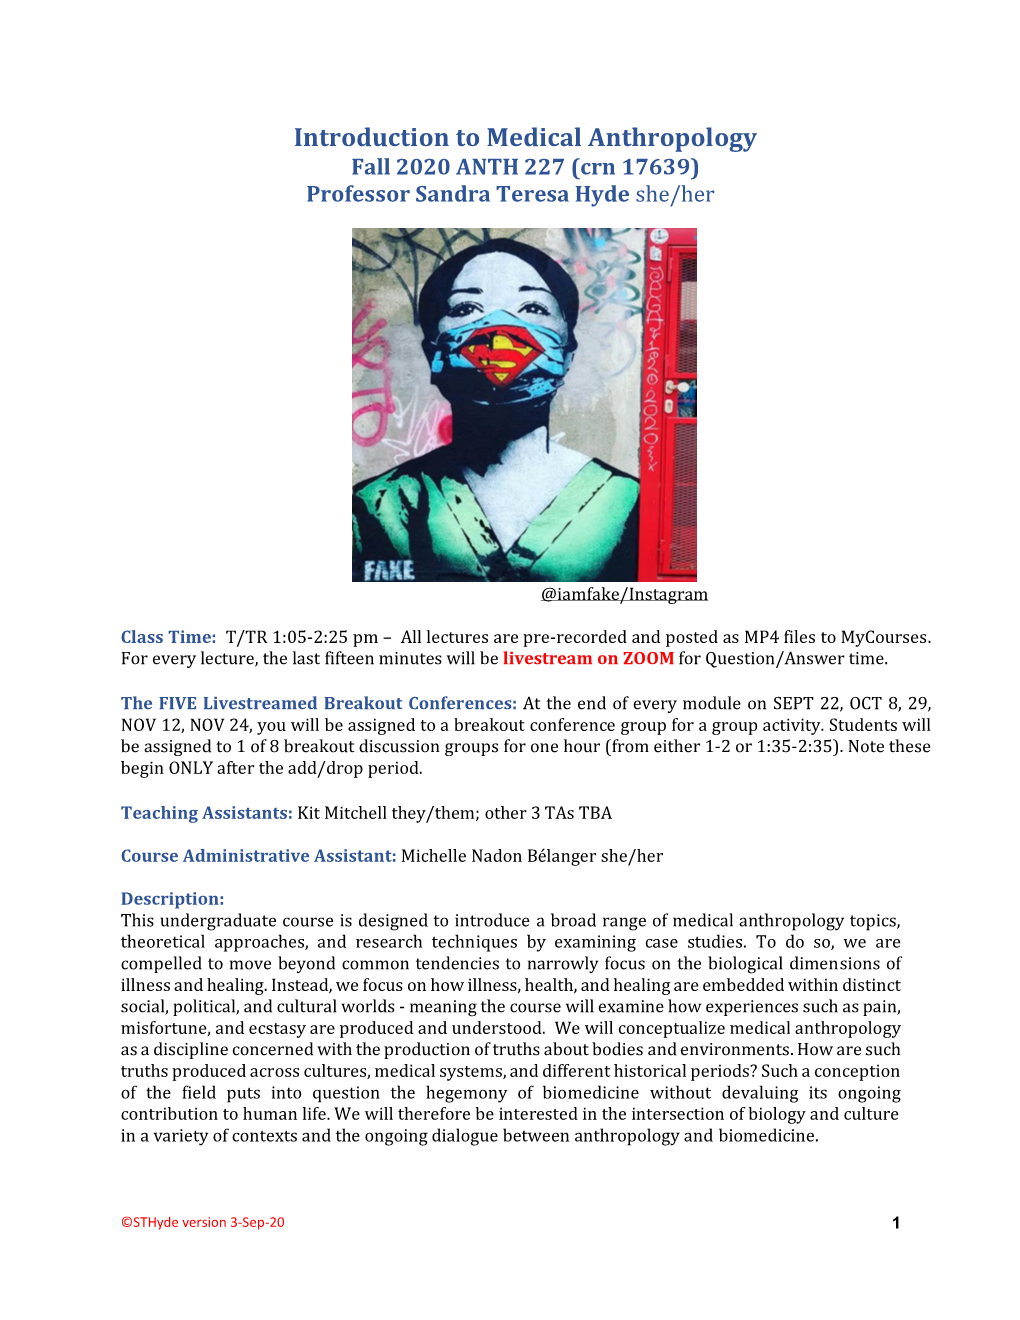 Introduction to Medical Anthropology Fall 2020 ANTH 227 (Crn 17639) Professor Sandra Teresa Hyde She/Her